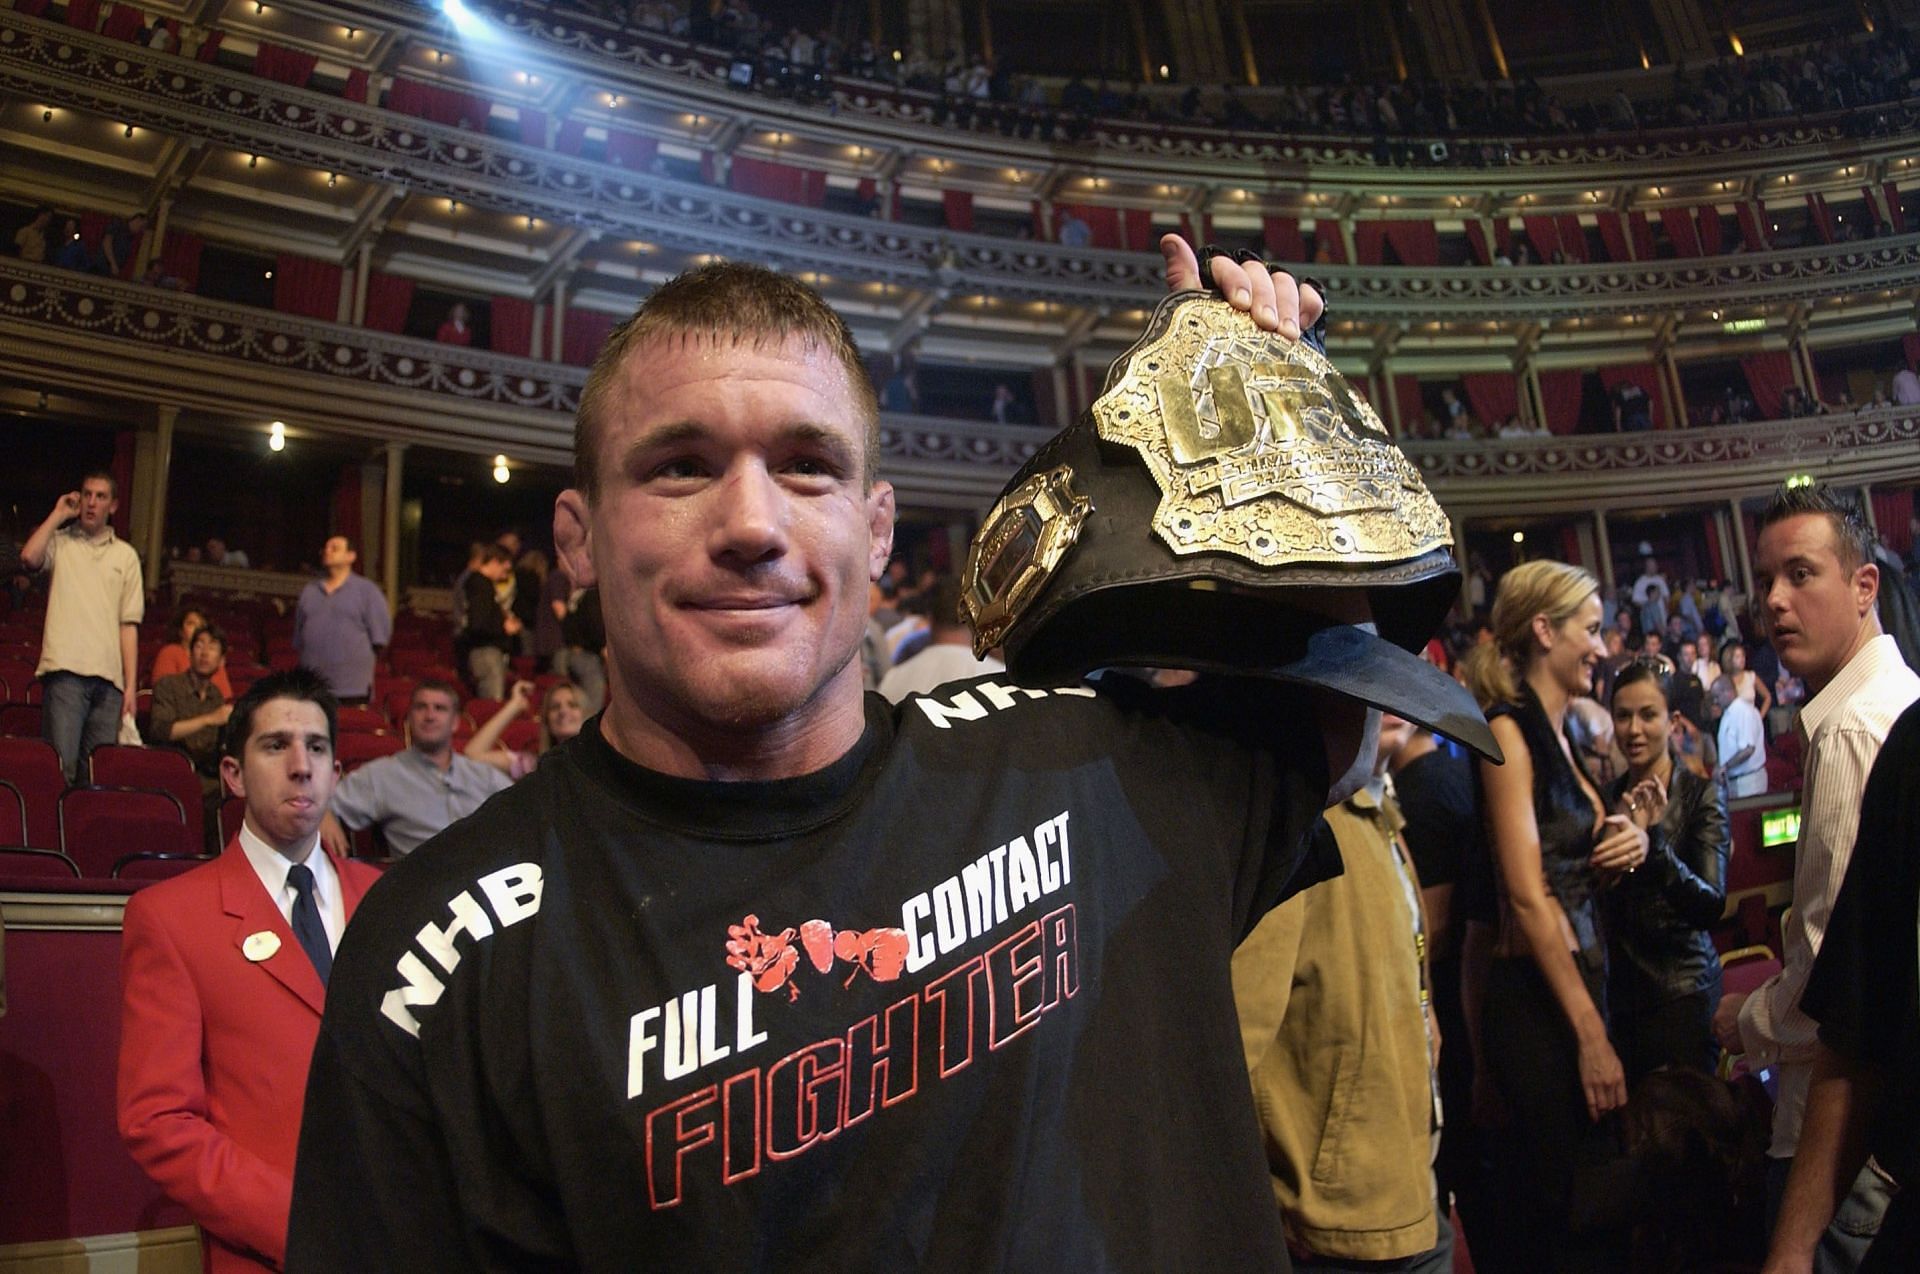 Despite a weaker striking game, Matt Hughes looked unstoppable in his prime